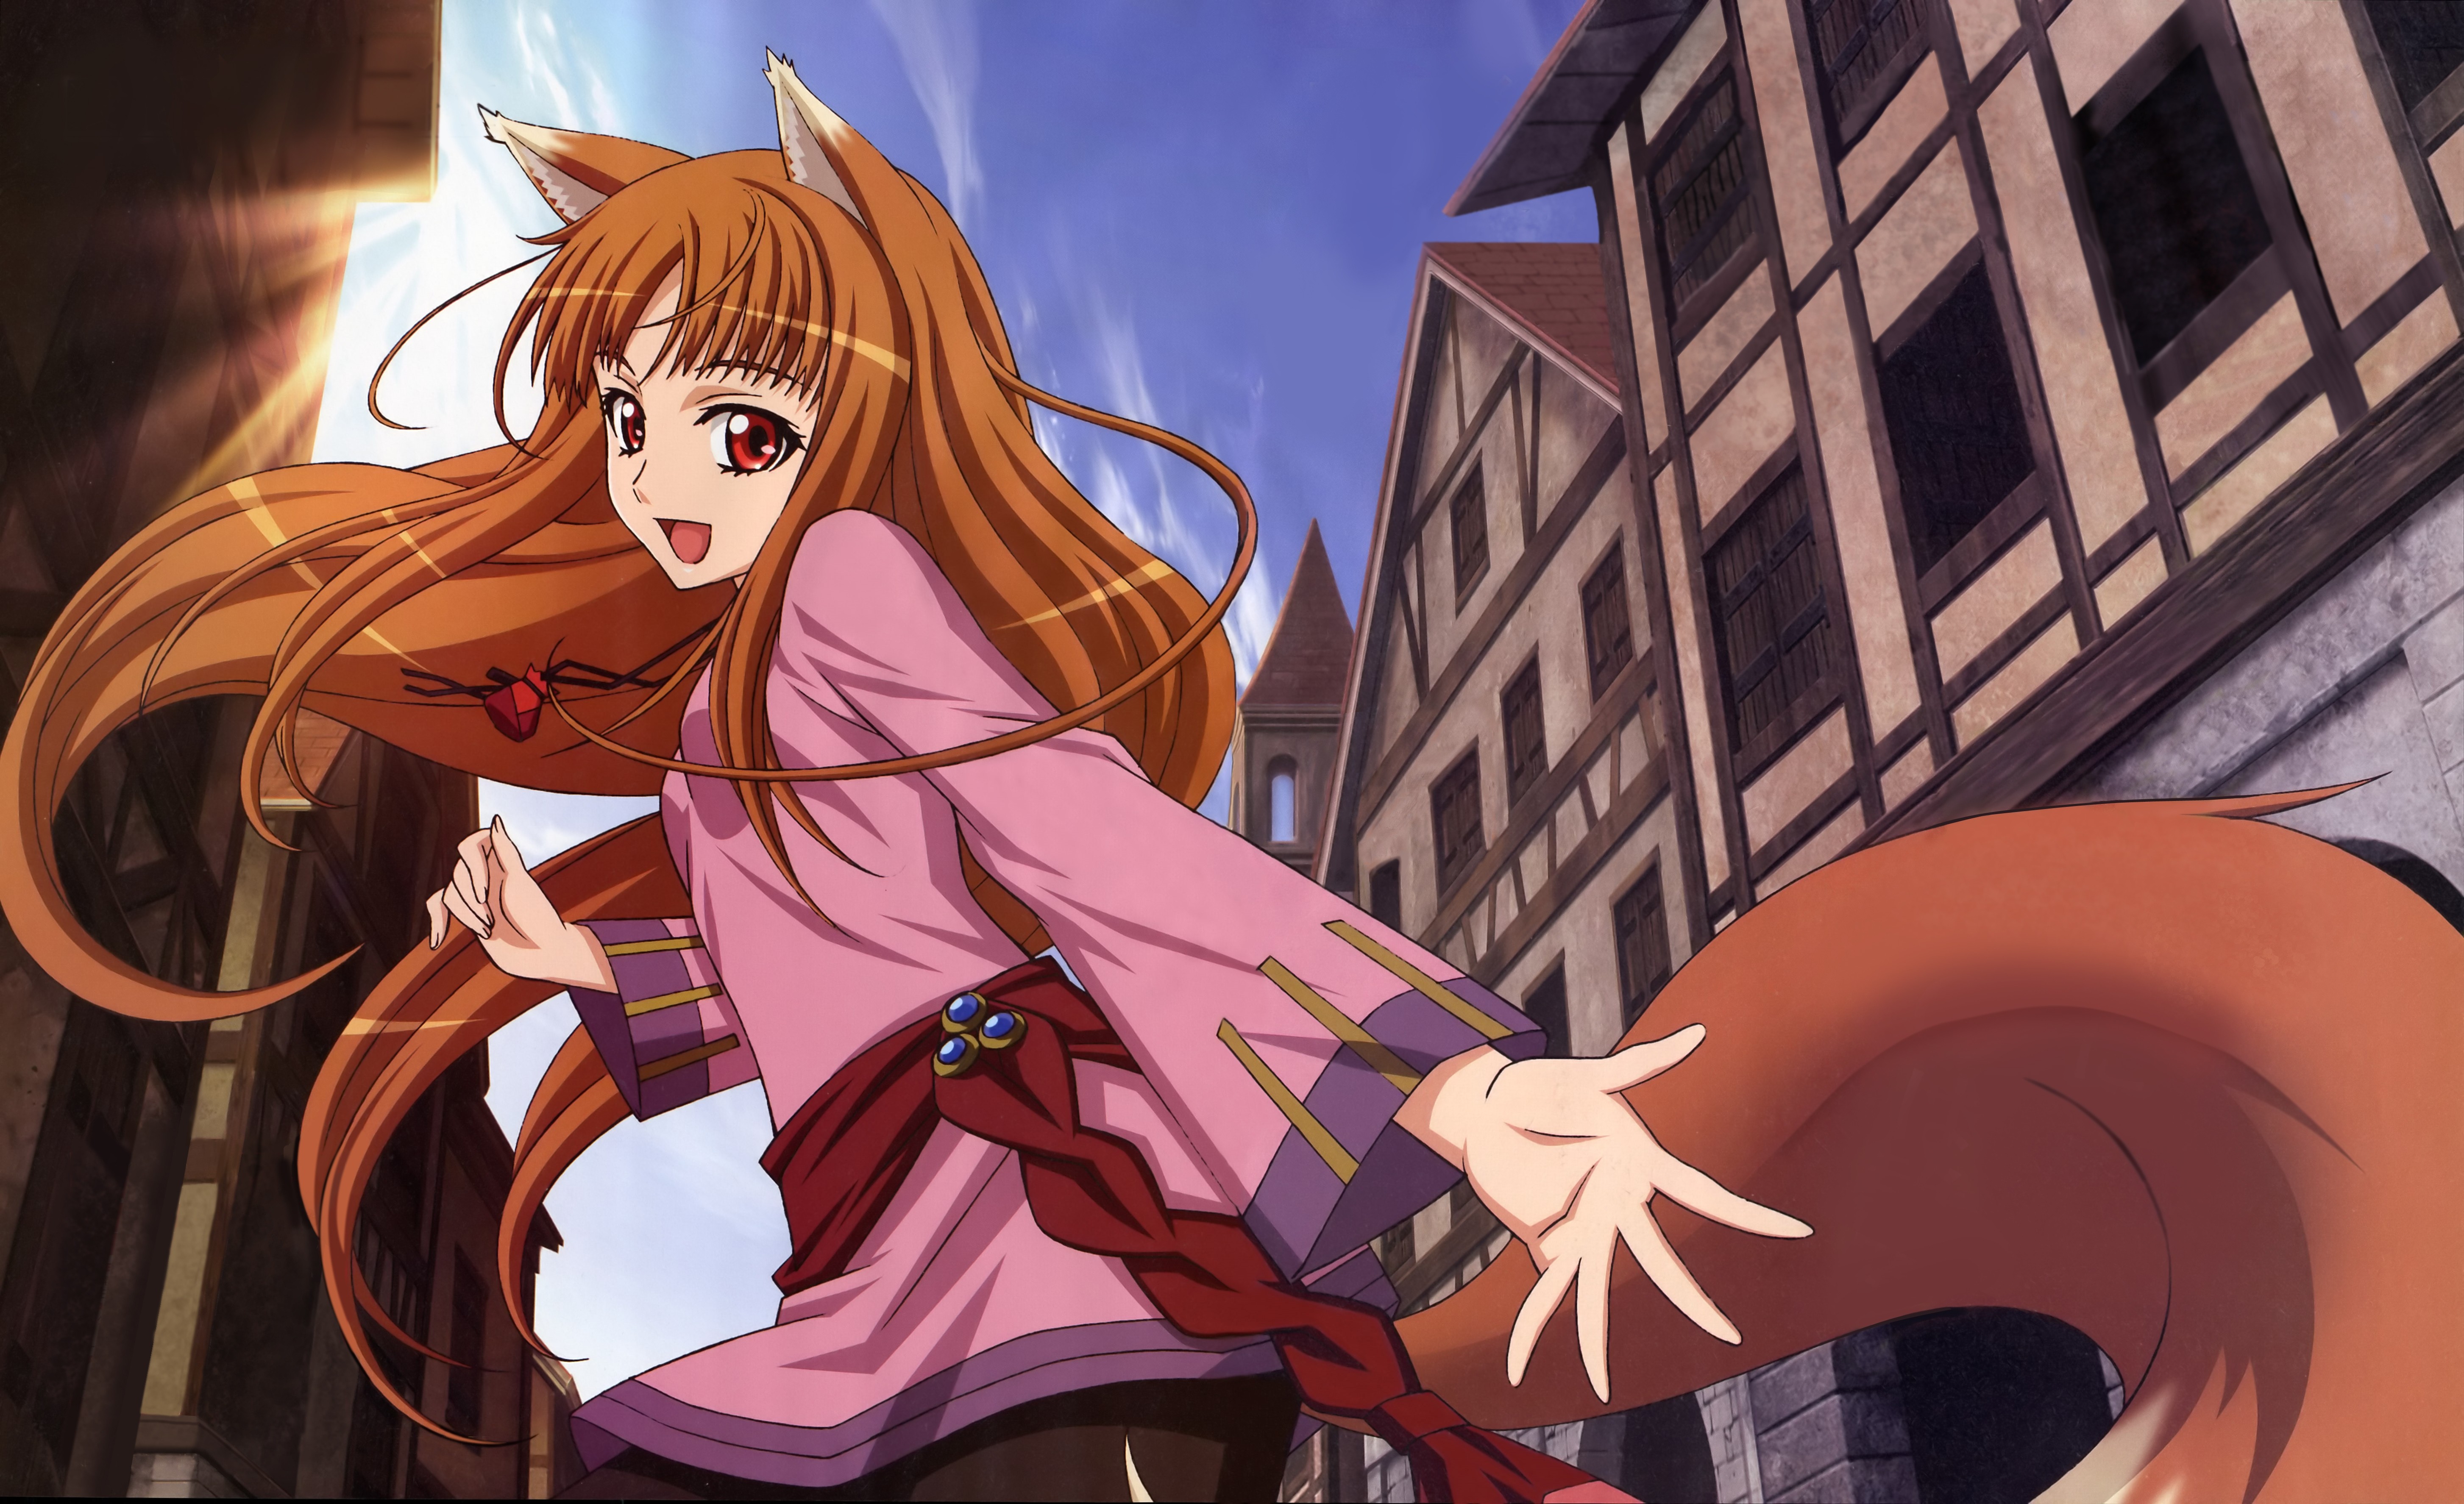 Spice And Wolf Nekomimi Holo The Wise Wolf Wallpaper - Anime Spicy And Wolf - HD Wallpaper 